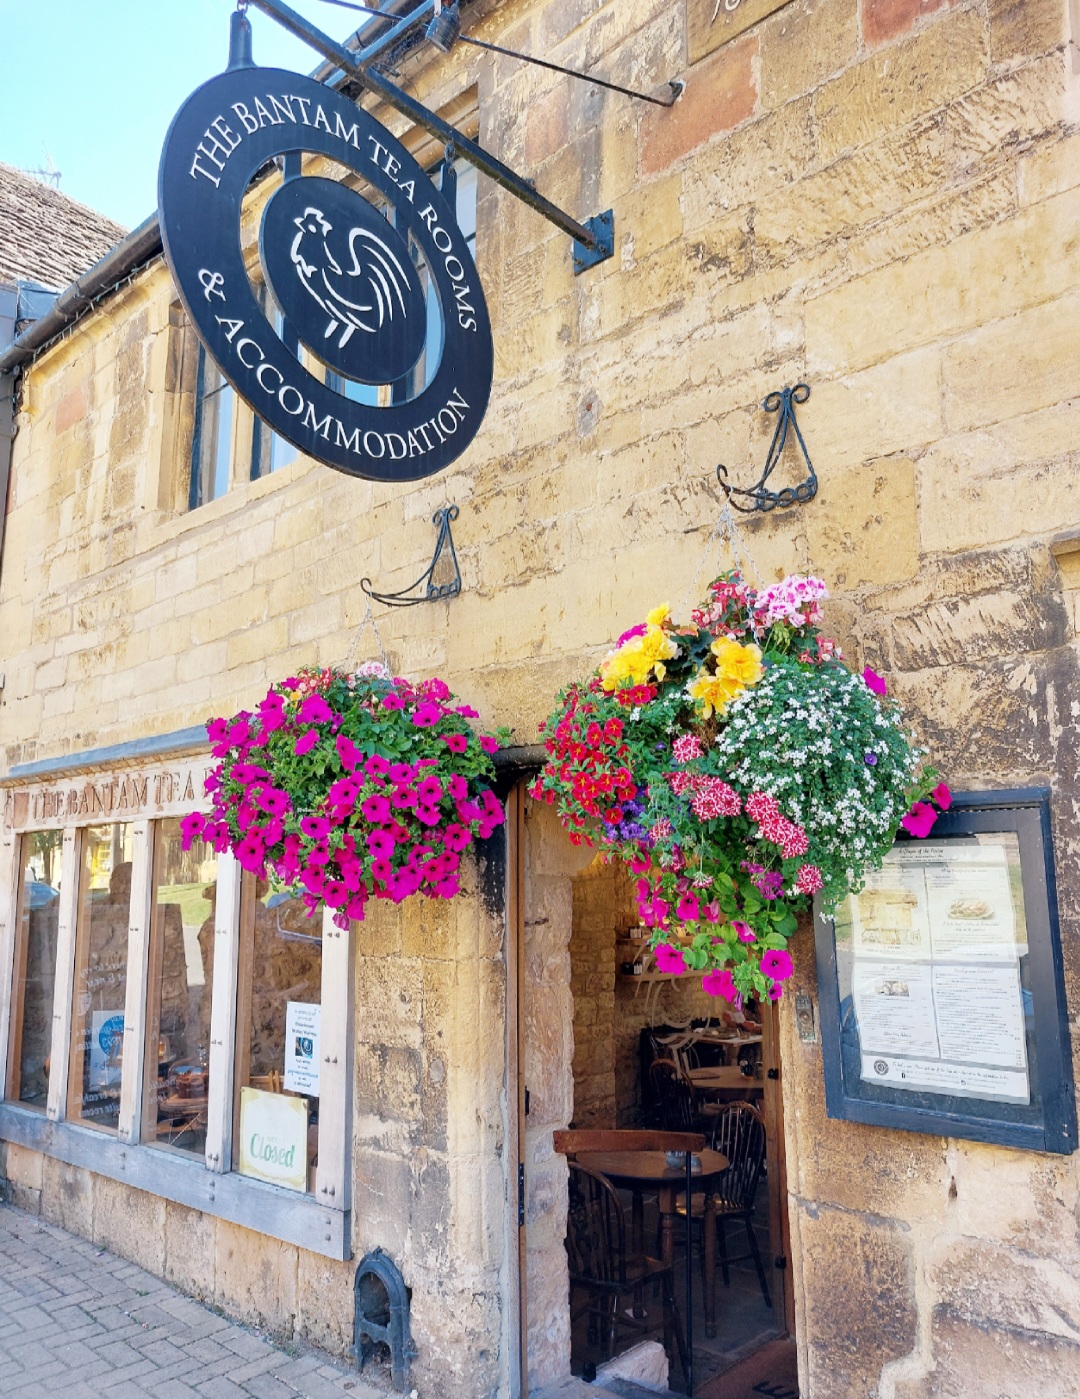 Entrance to the Bantam Tearooms, recommended places to eat in Chipping Campden